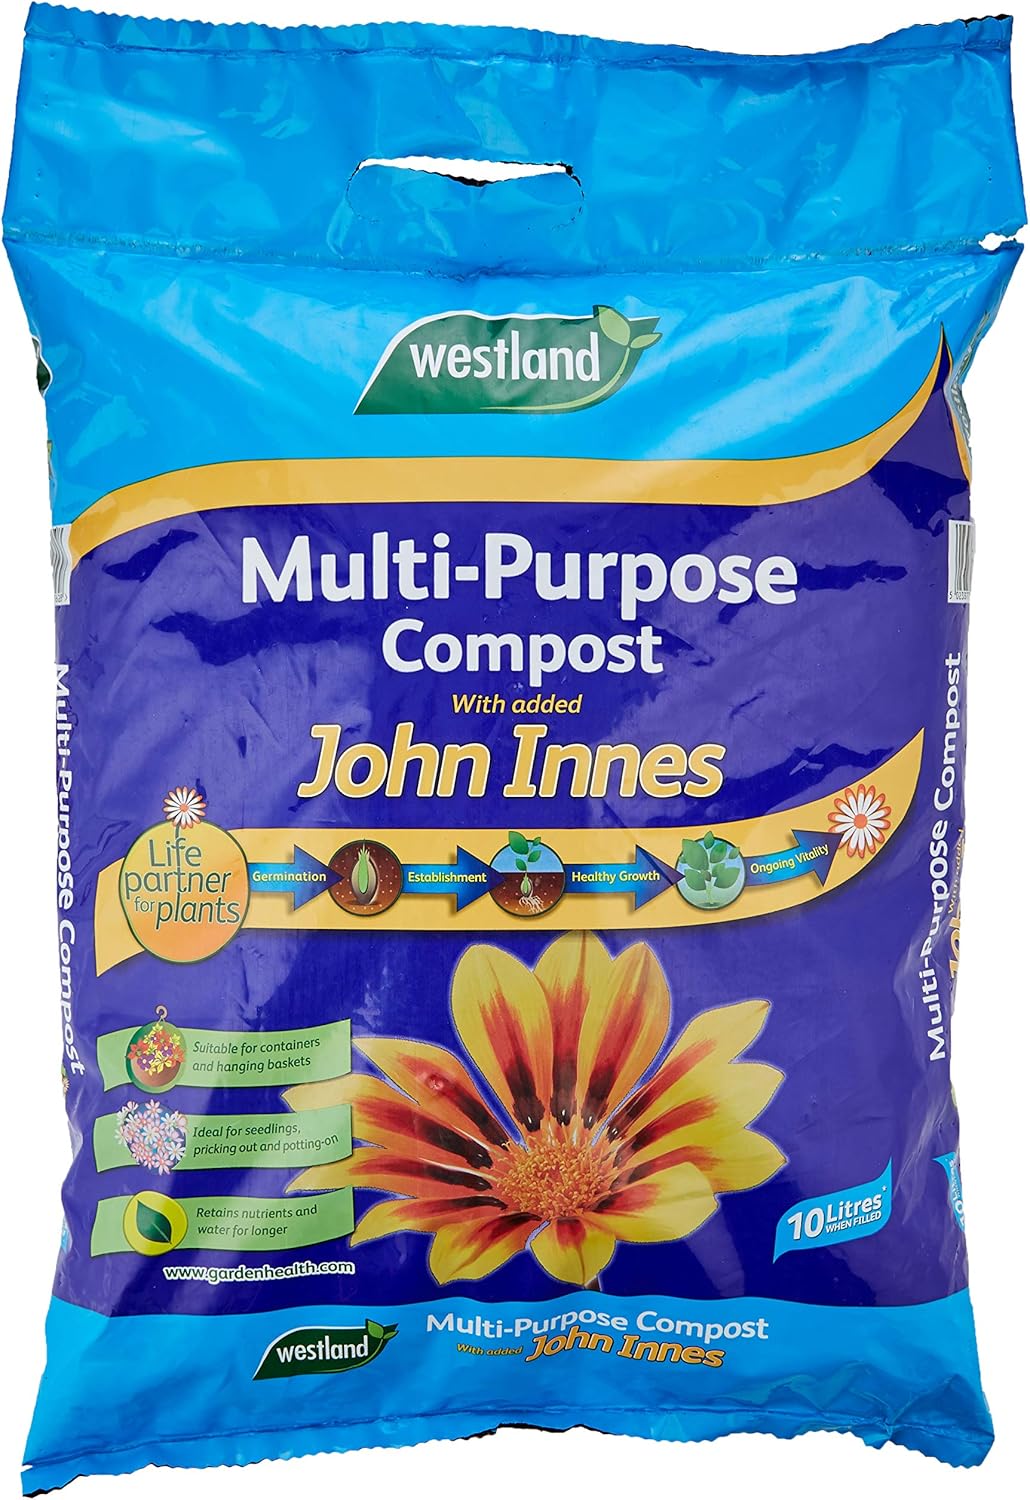 Westland Multipurpose Compost with Added John Innes, 10 L?10100012